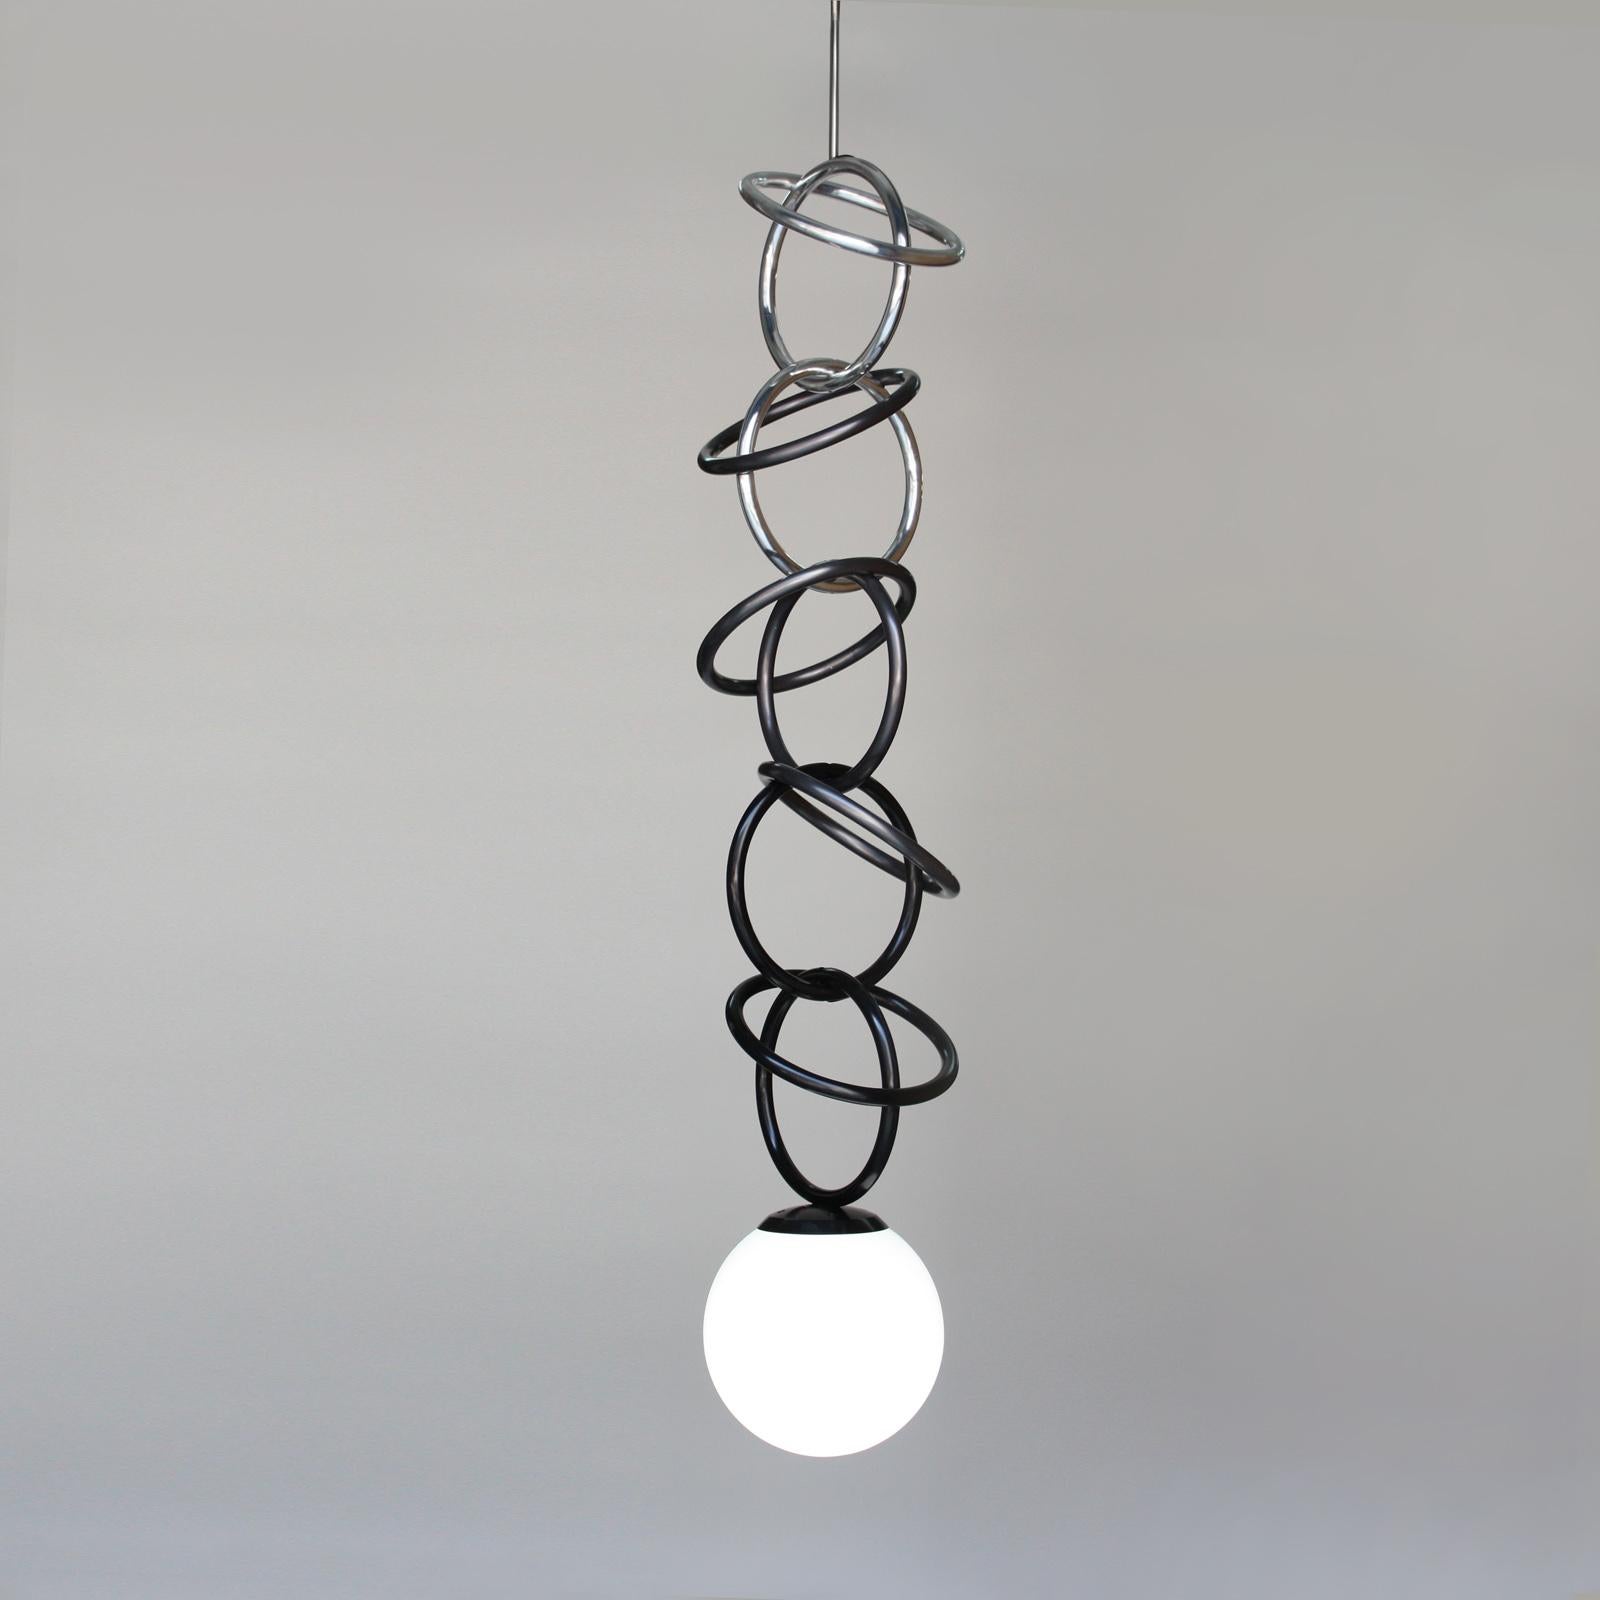 Inspired by jewelry links, this oversized ceiling lamp is a dramatic accent and decoration for your home. It's a mixture of complementary metal finishes cascading from light to dark, finished with a luminous pearl-like glass orb at the